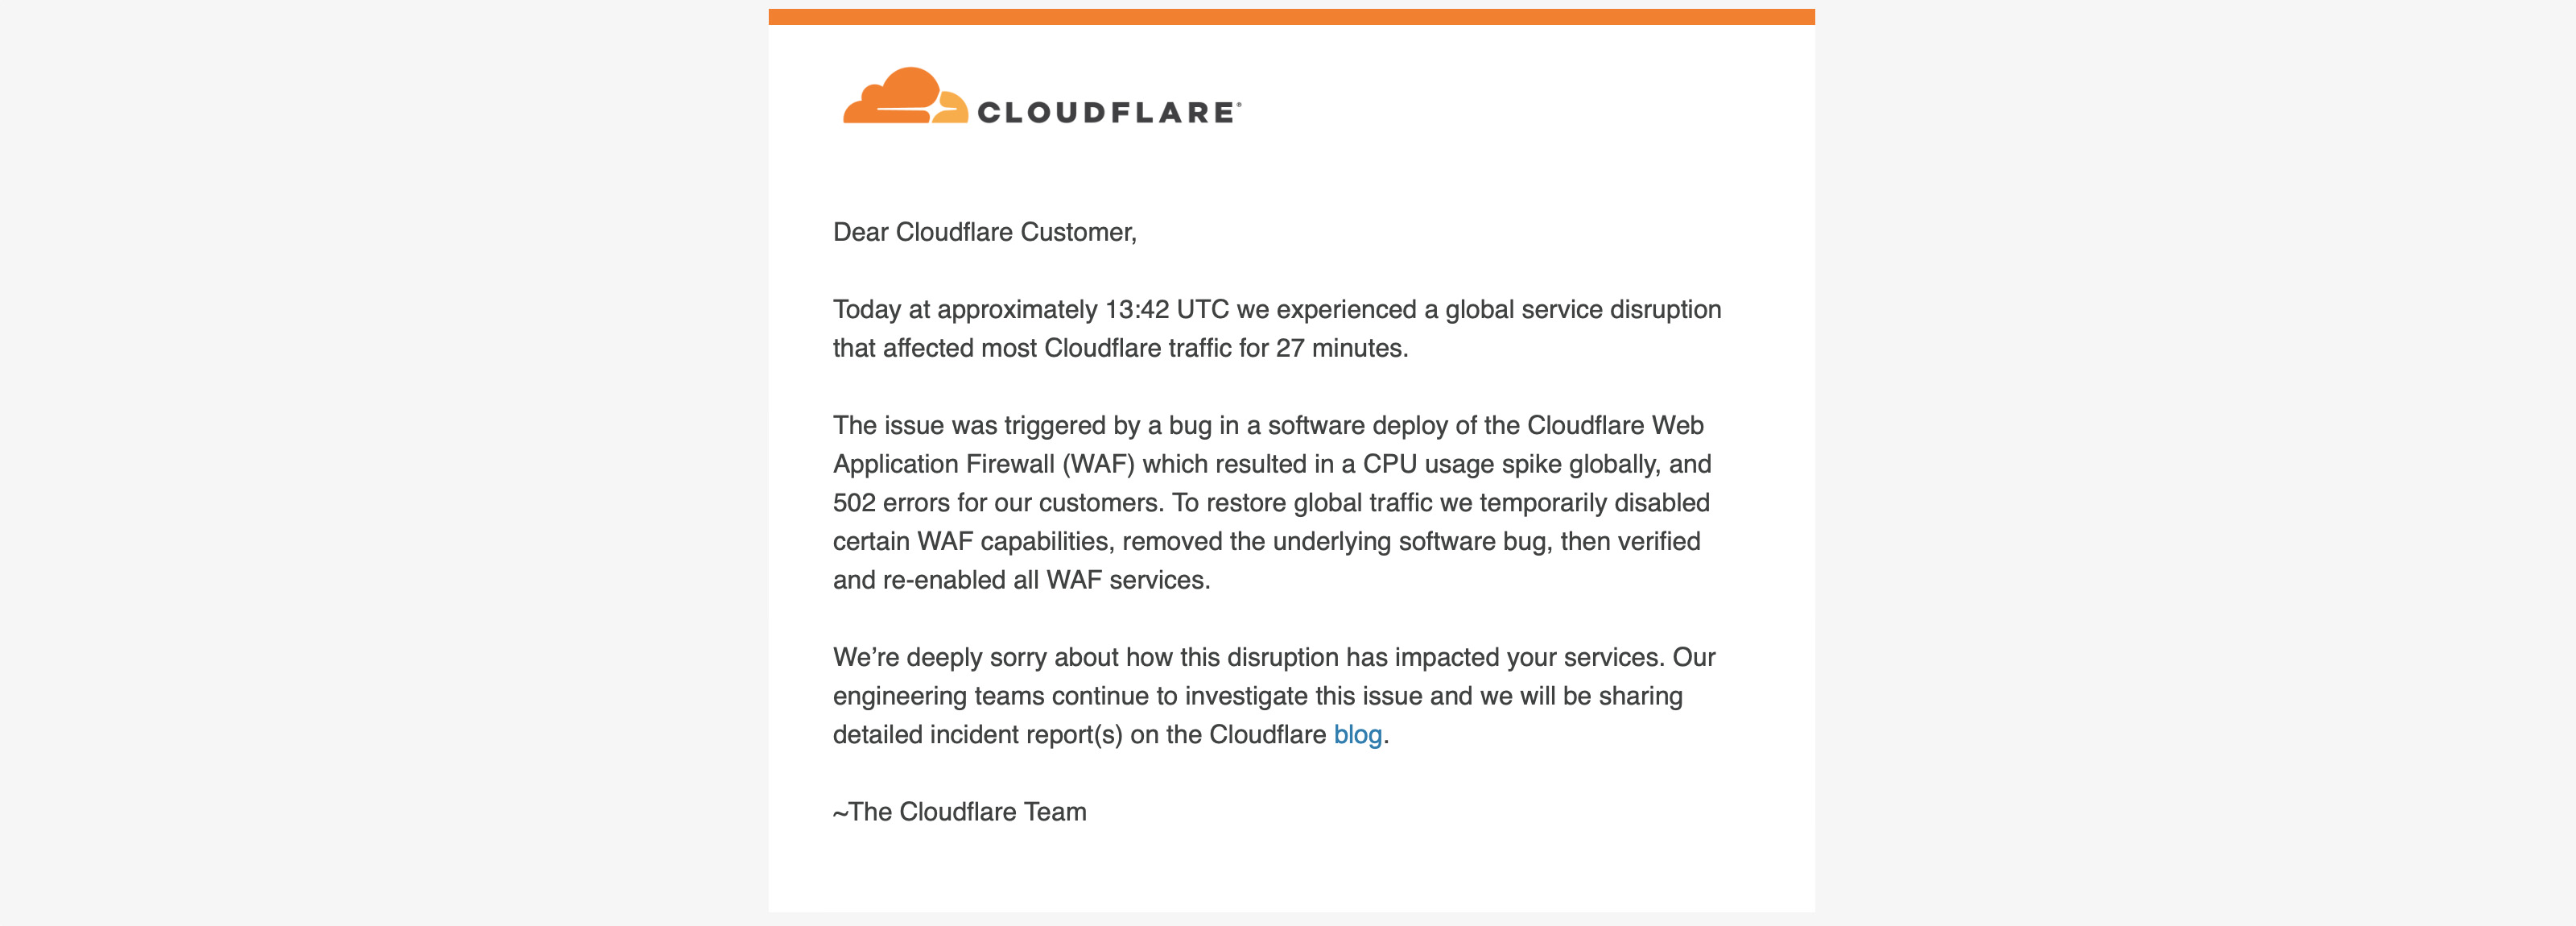 CloudFlare Message